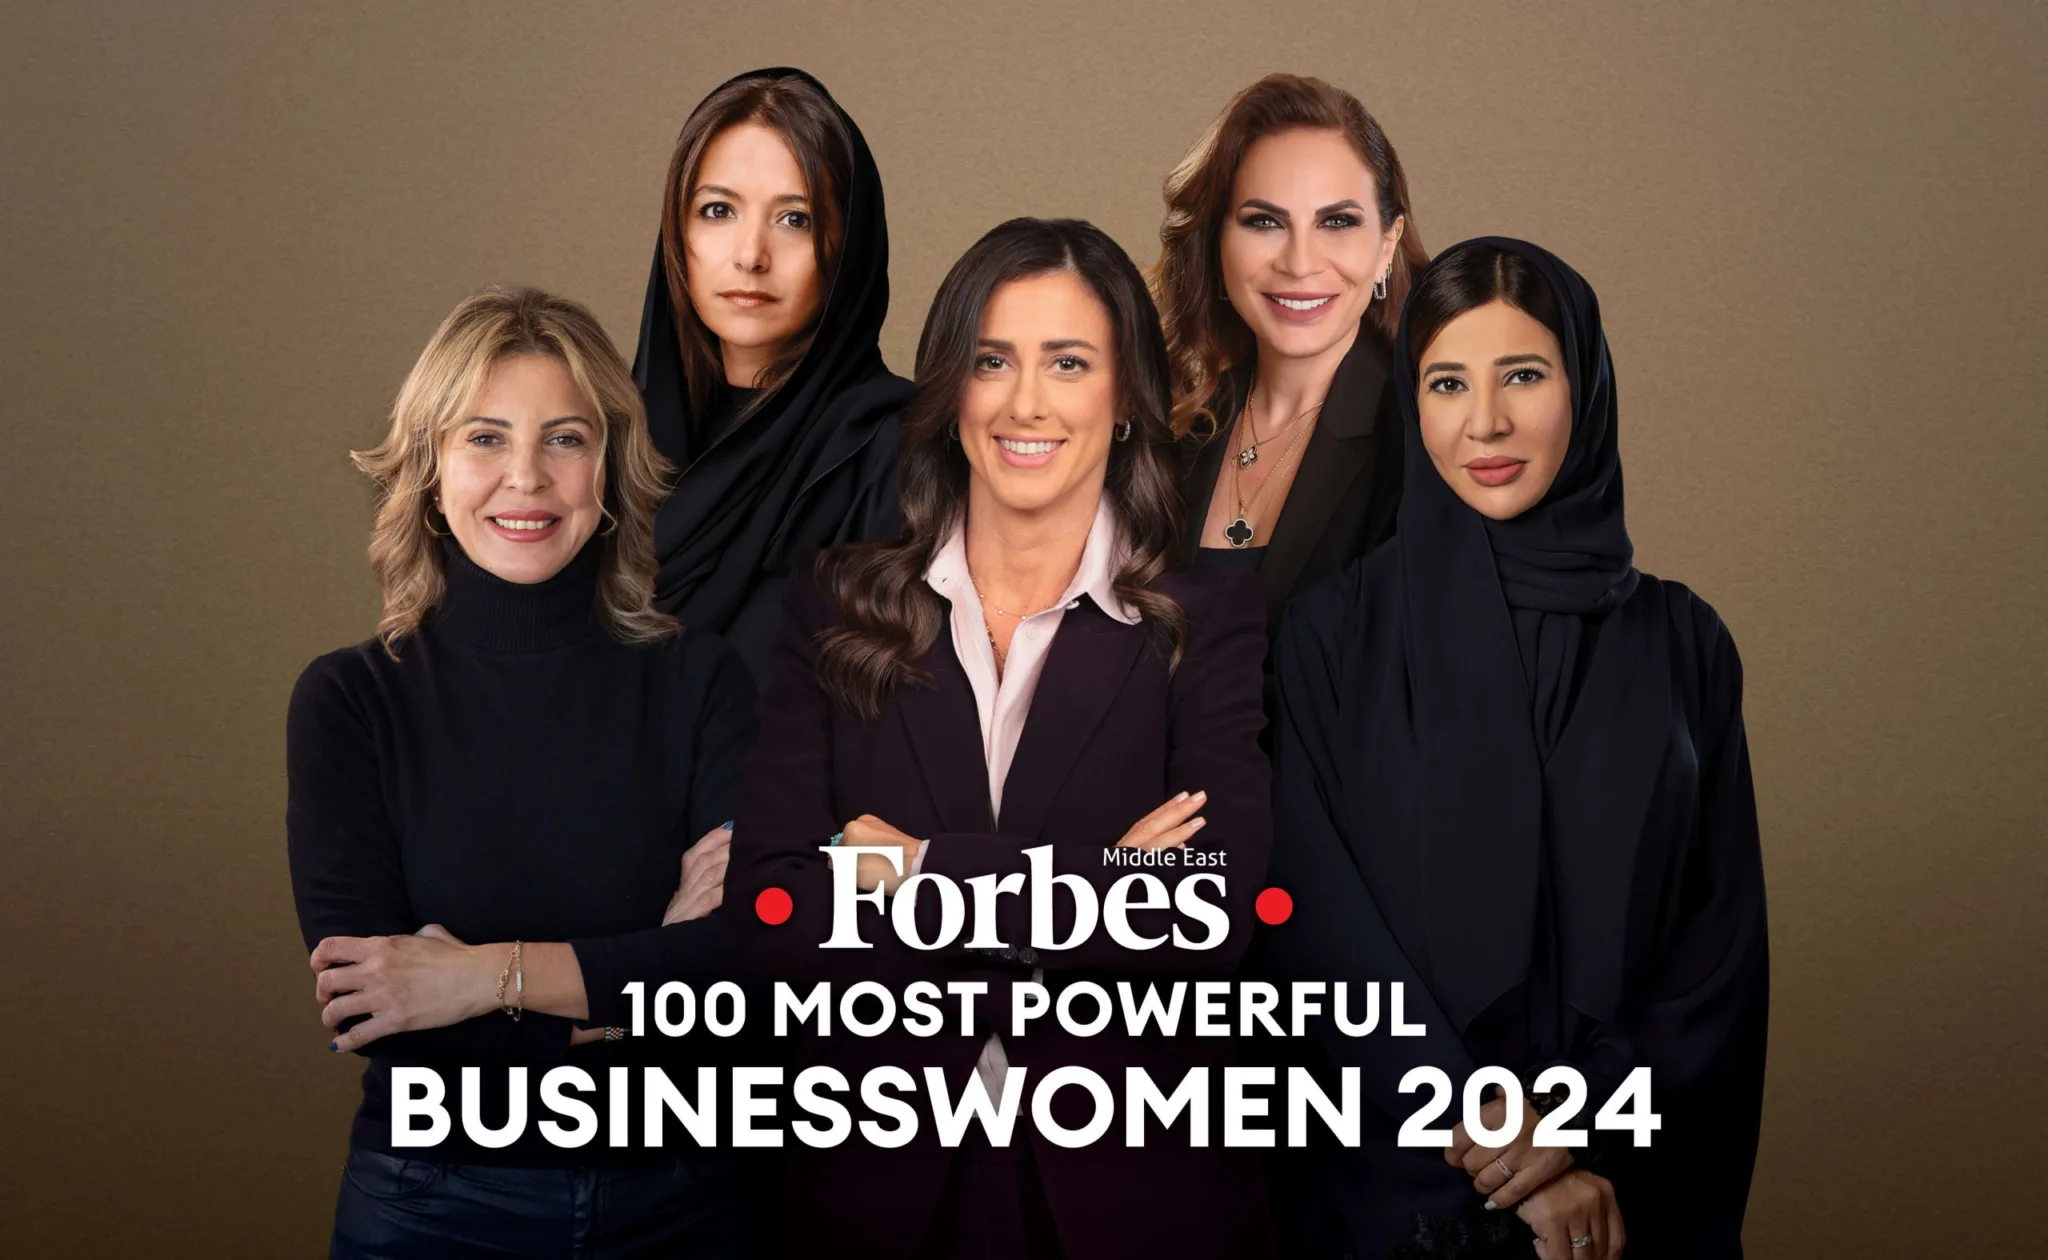 Nine Saudi women made the list of Forbes, which has released its annual list of the Middle East's 100 most prominent businesswomen for 2024.